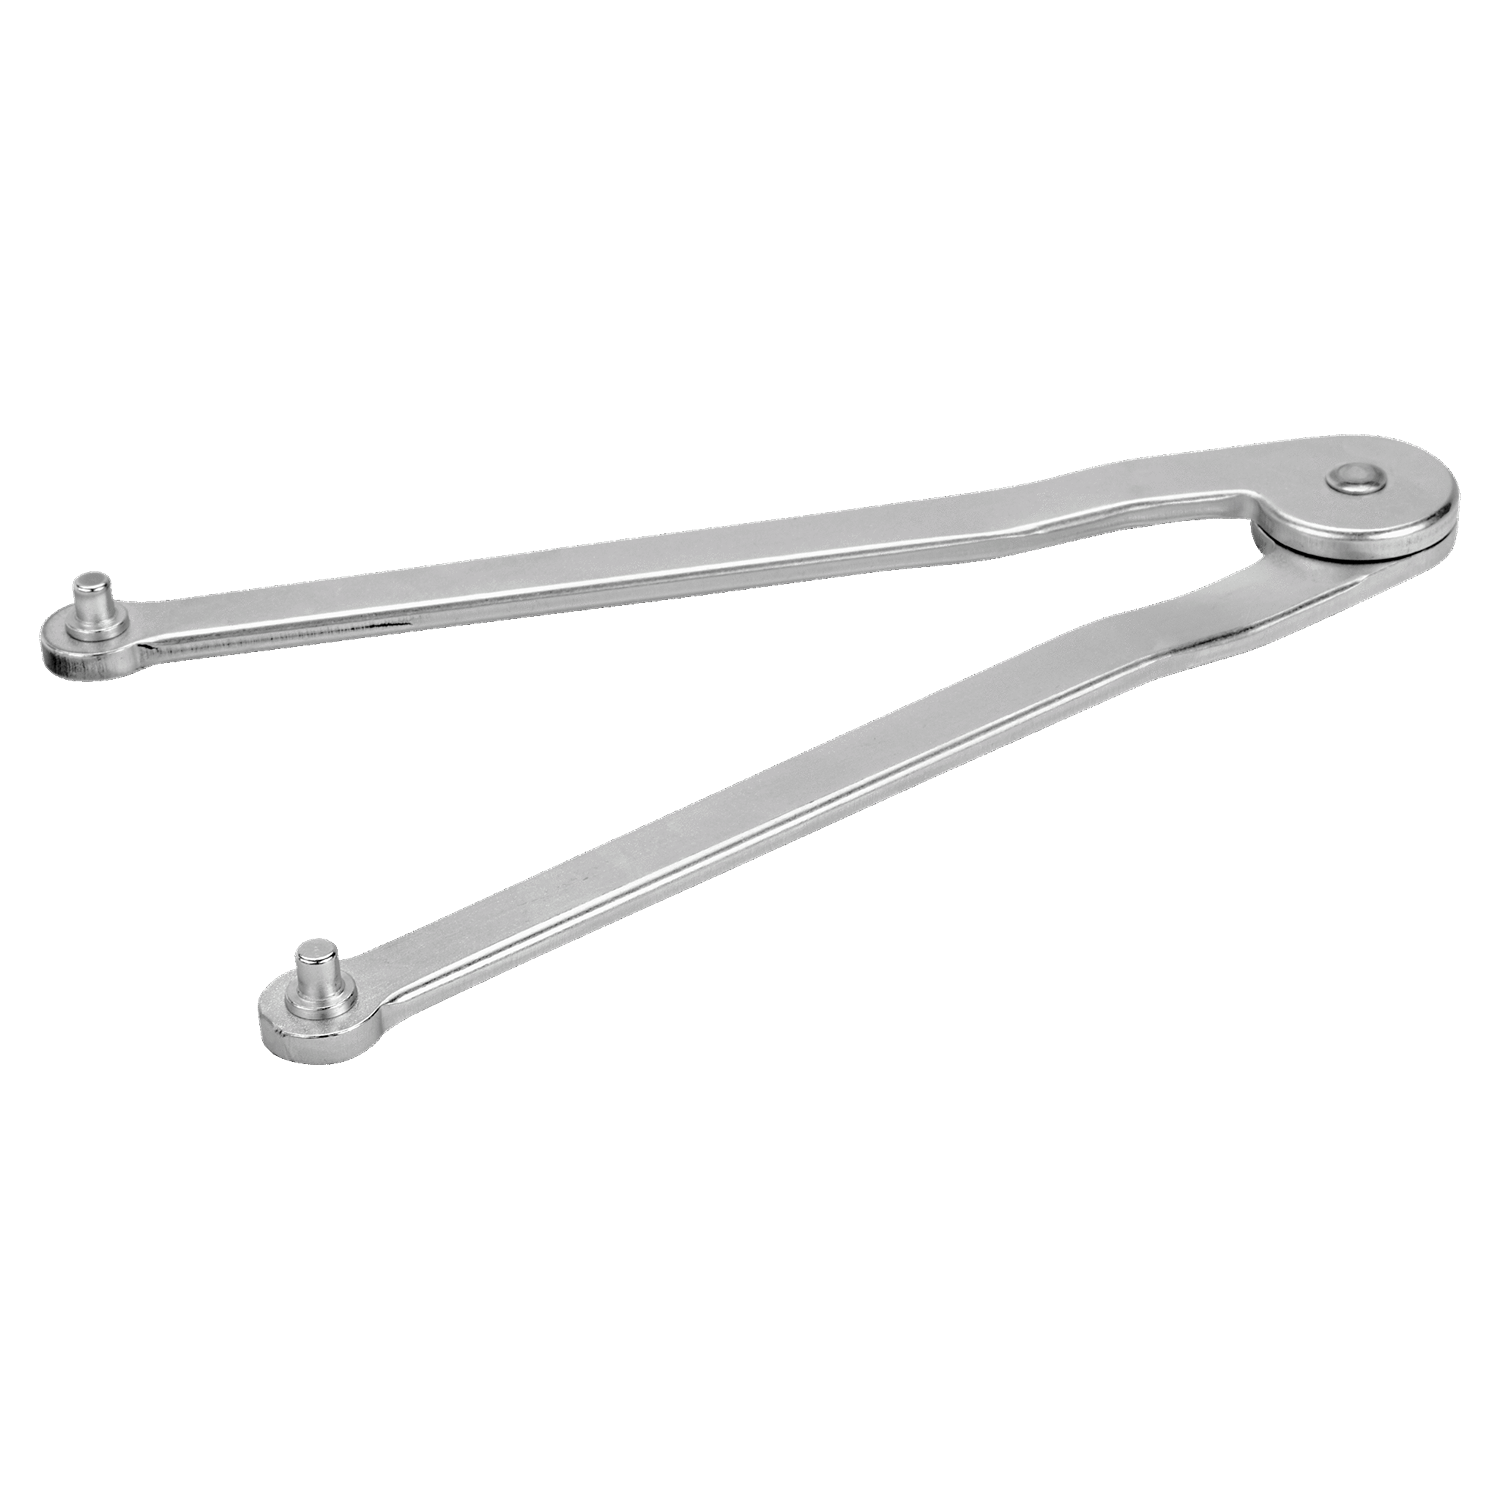 BAHCO 4307 Adjustable Pin Wrench with Chrome Finish - Premium Adjustable Pin Wrench from BAHCO - Shop now at Yew Aik.